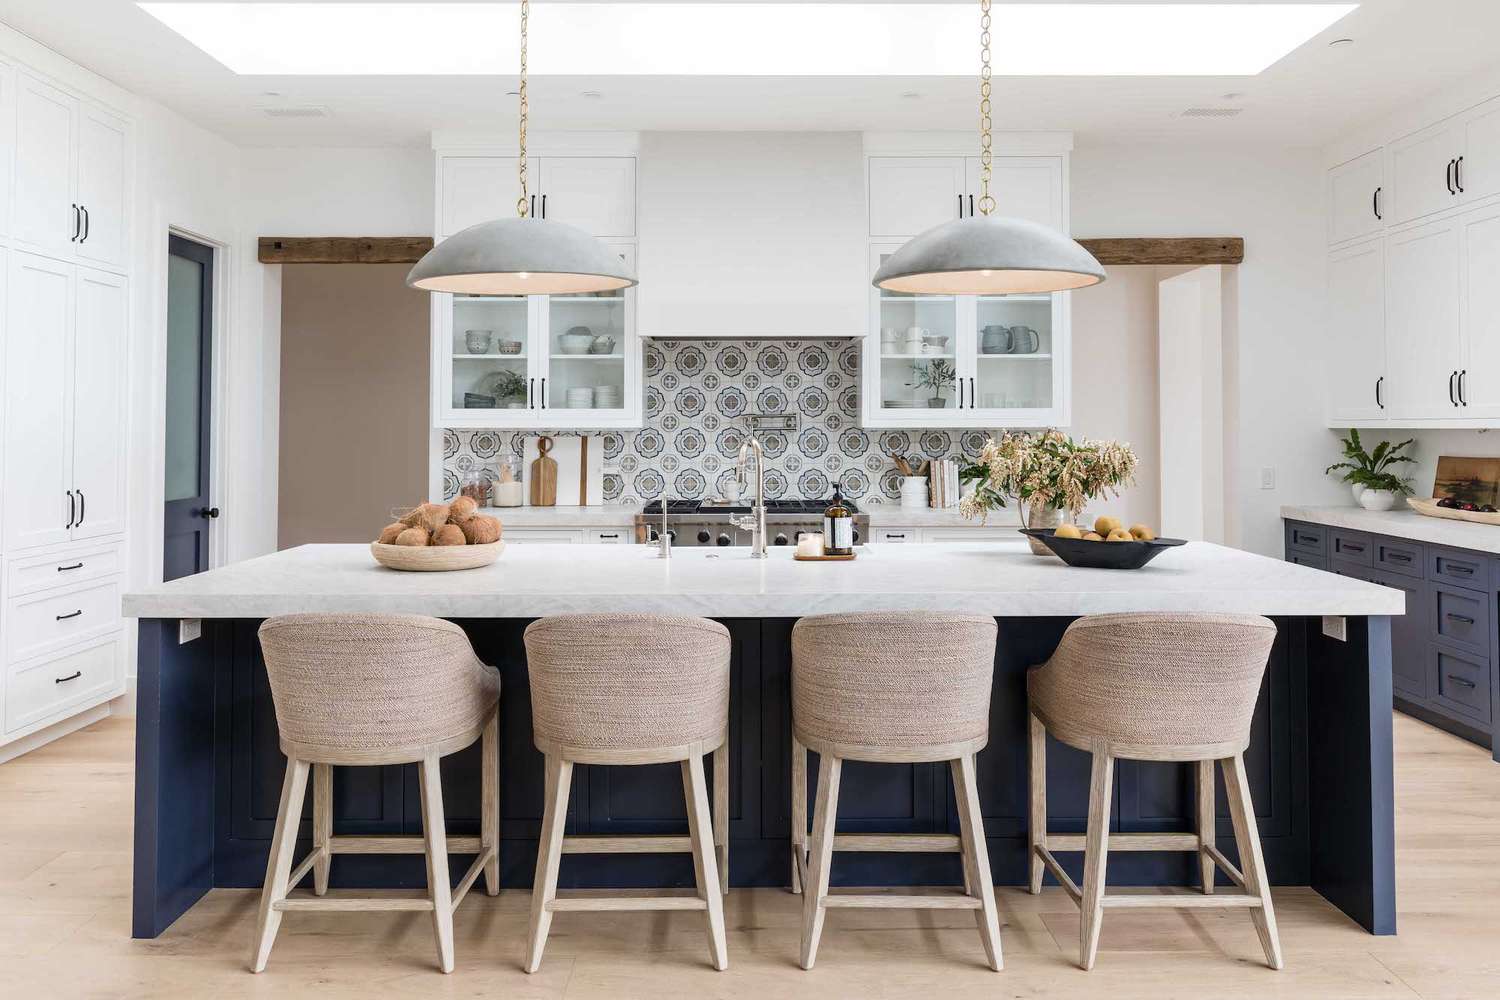 Kitchen with long island, hanging pendant lights and tile